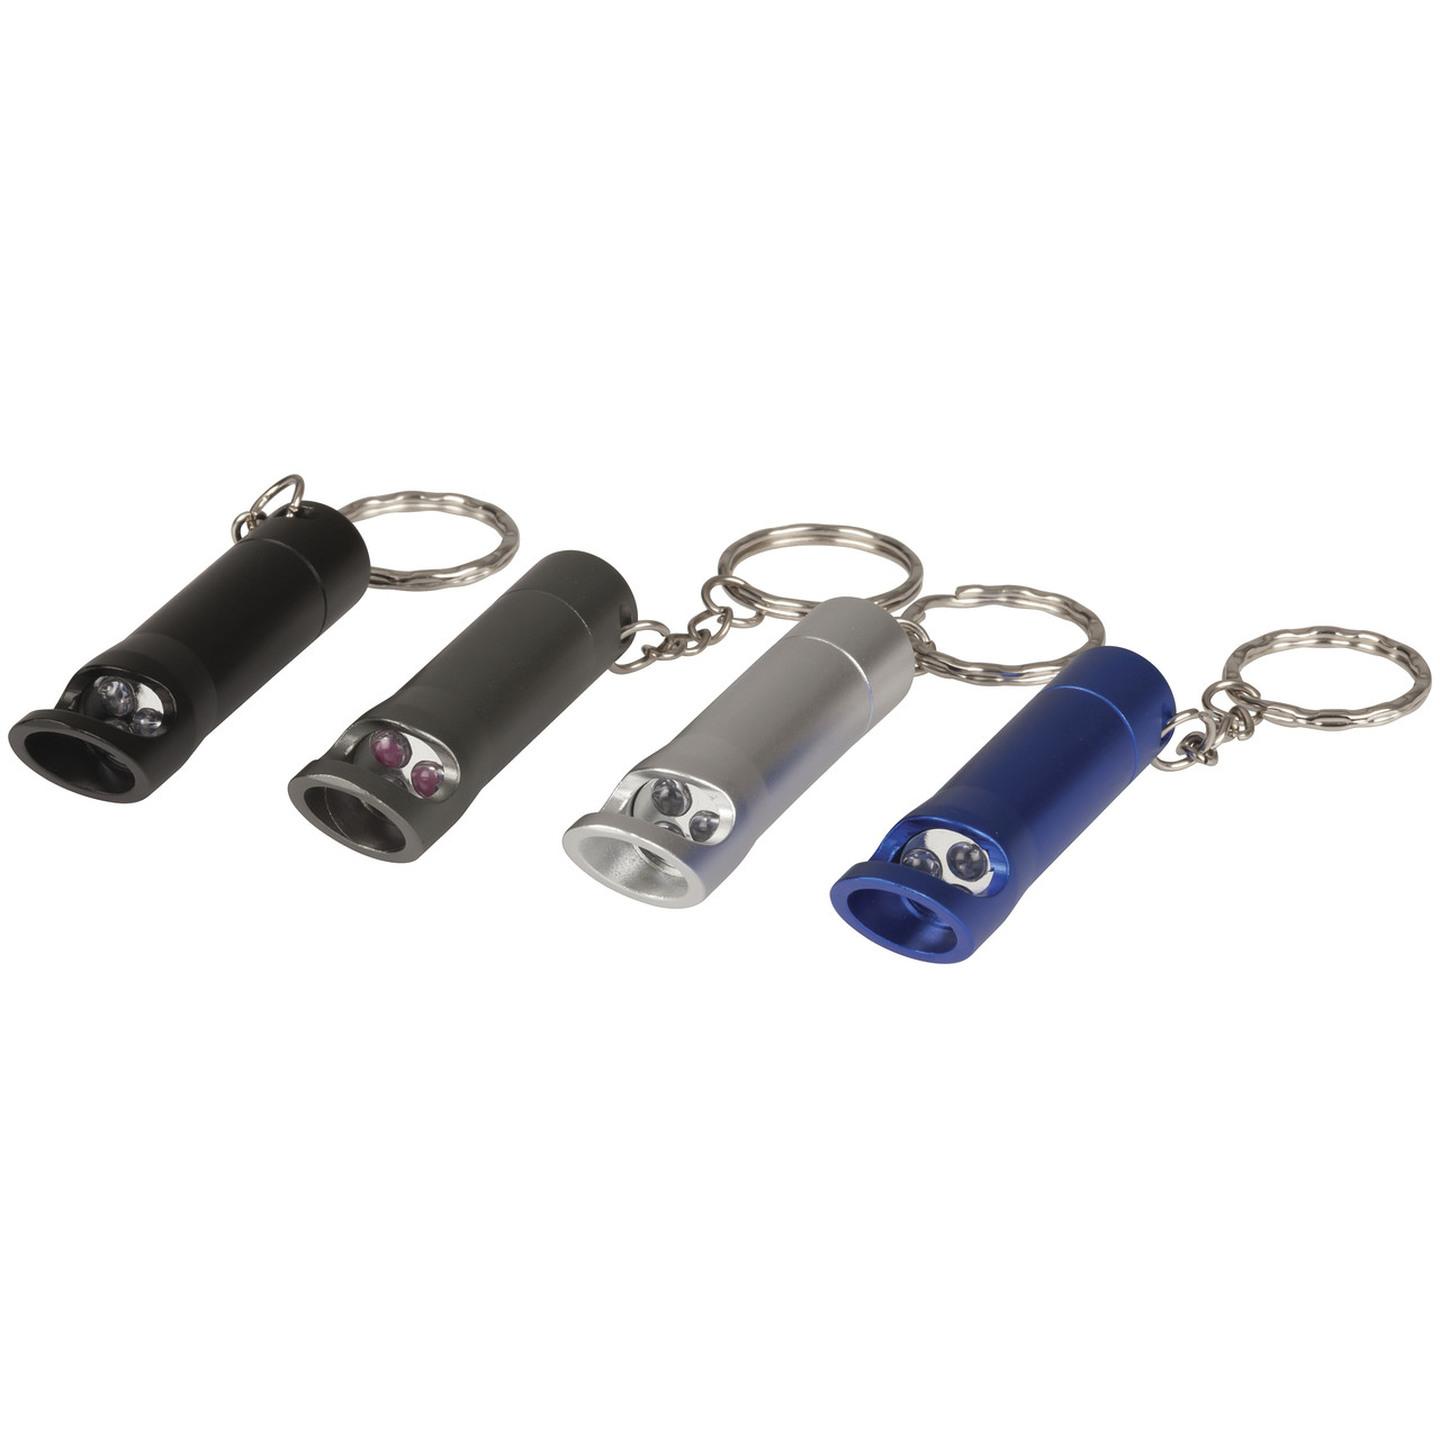 Keyring Torch with 3 LEDS and Bottle Opener